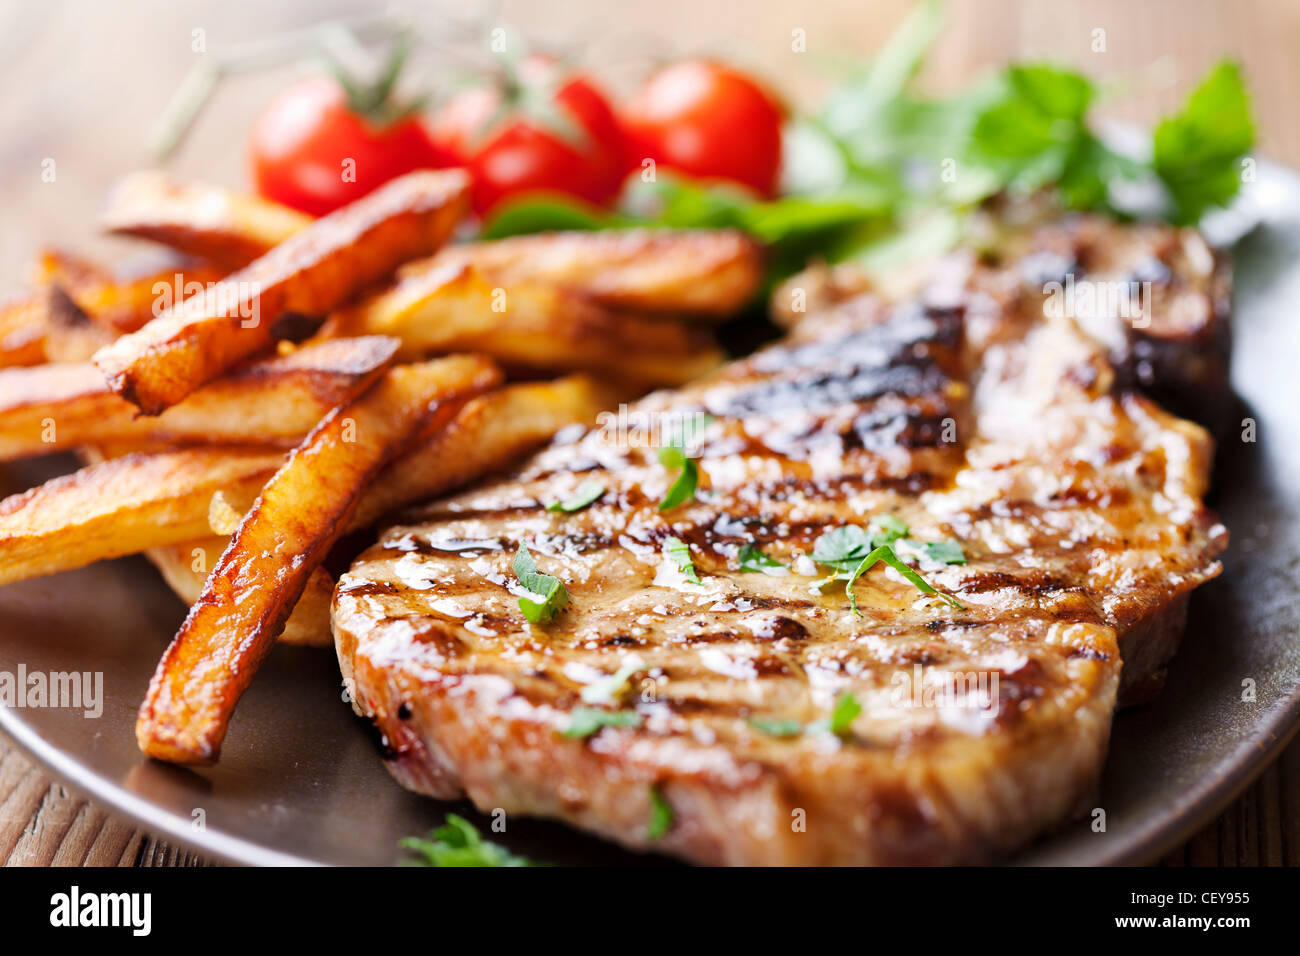 steak and chips with salad Stock Photo